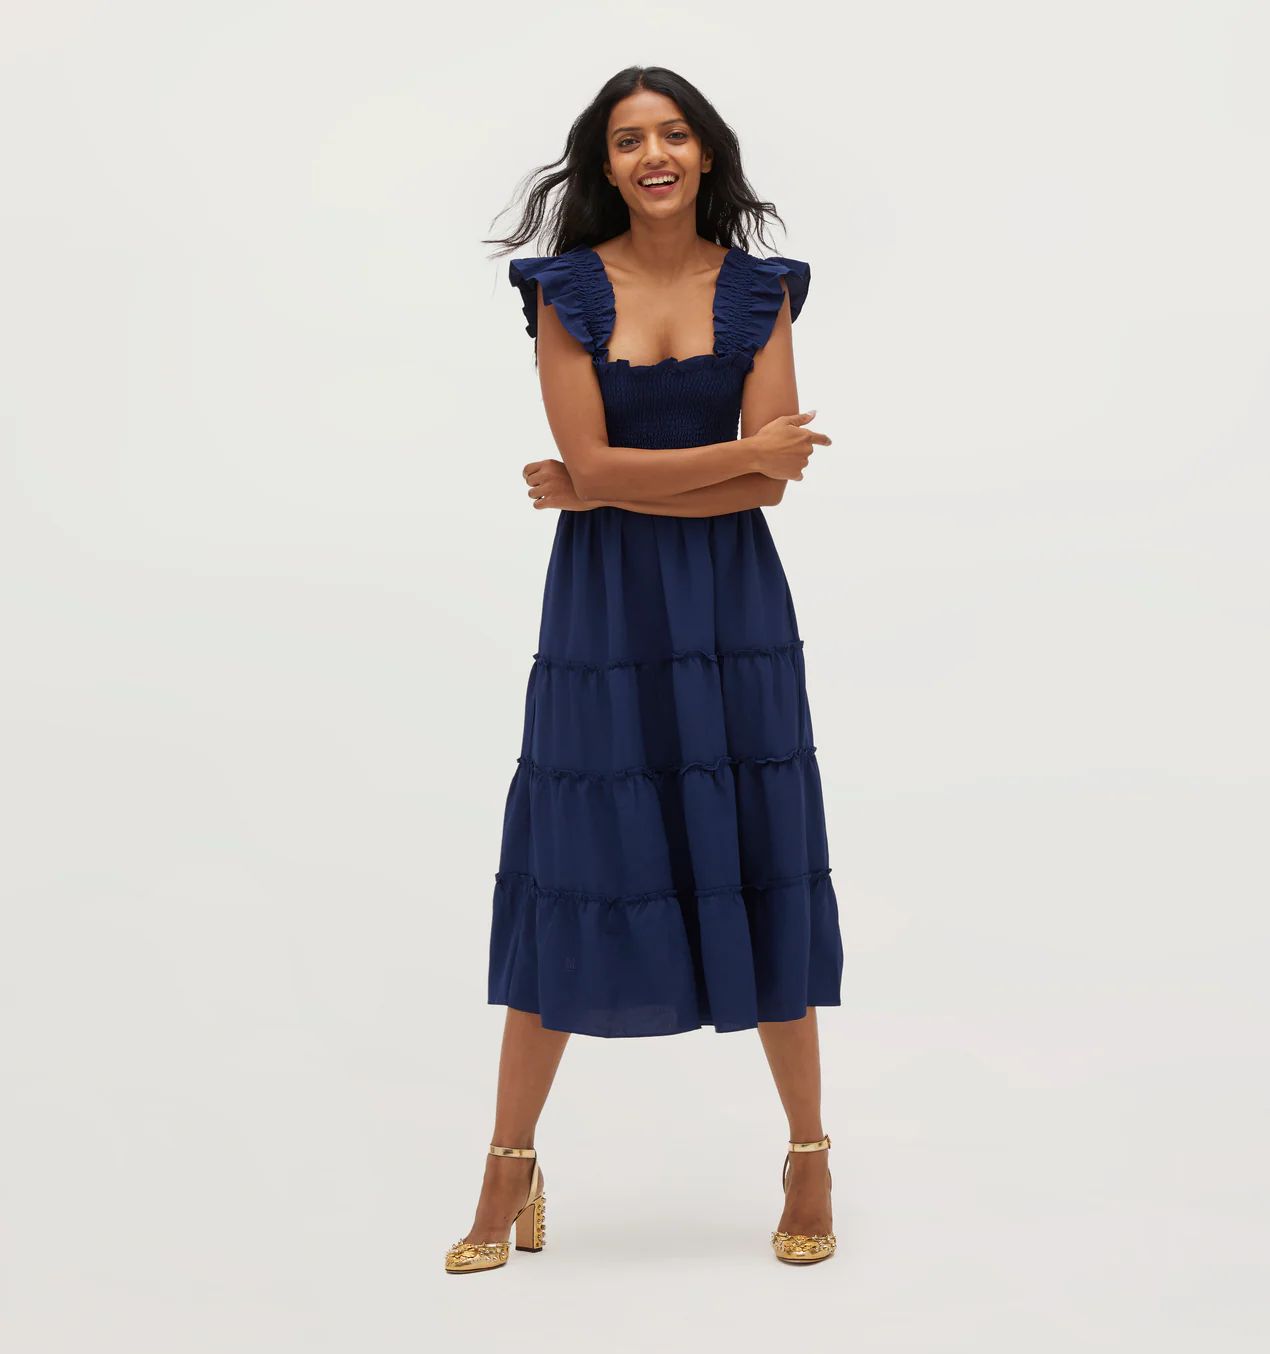 The Ellie Nap Dress - Navy Crepe | Hill House Home